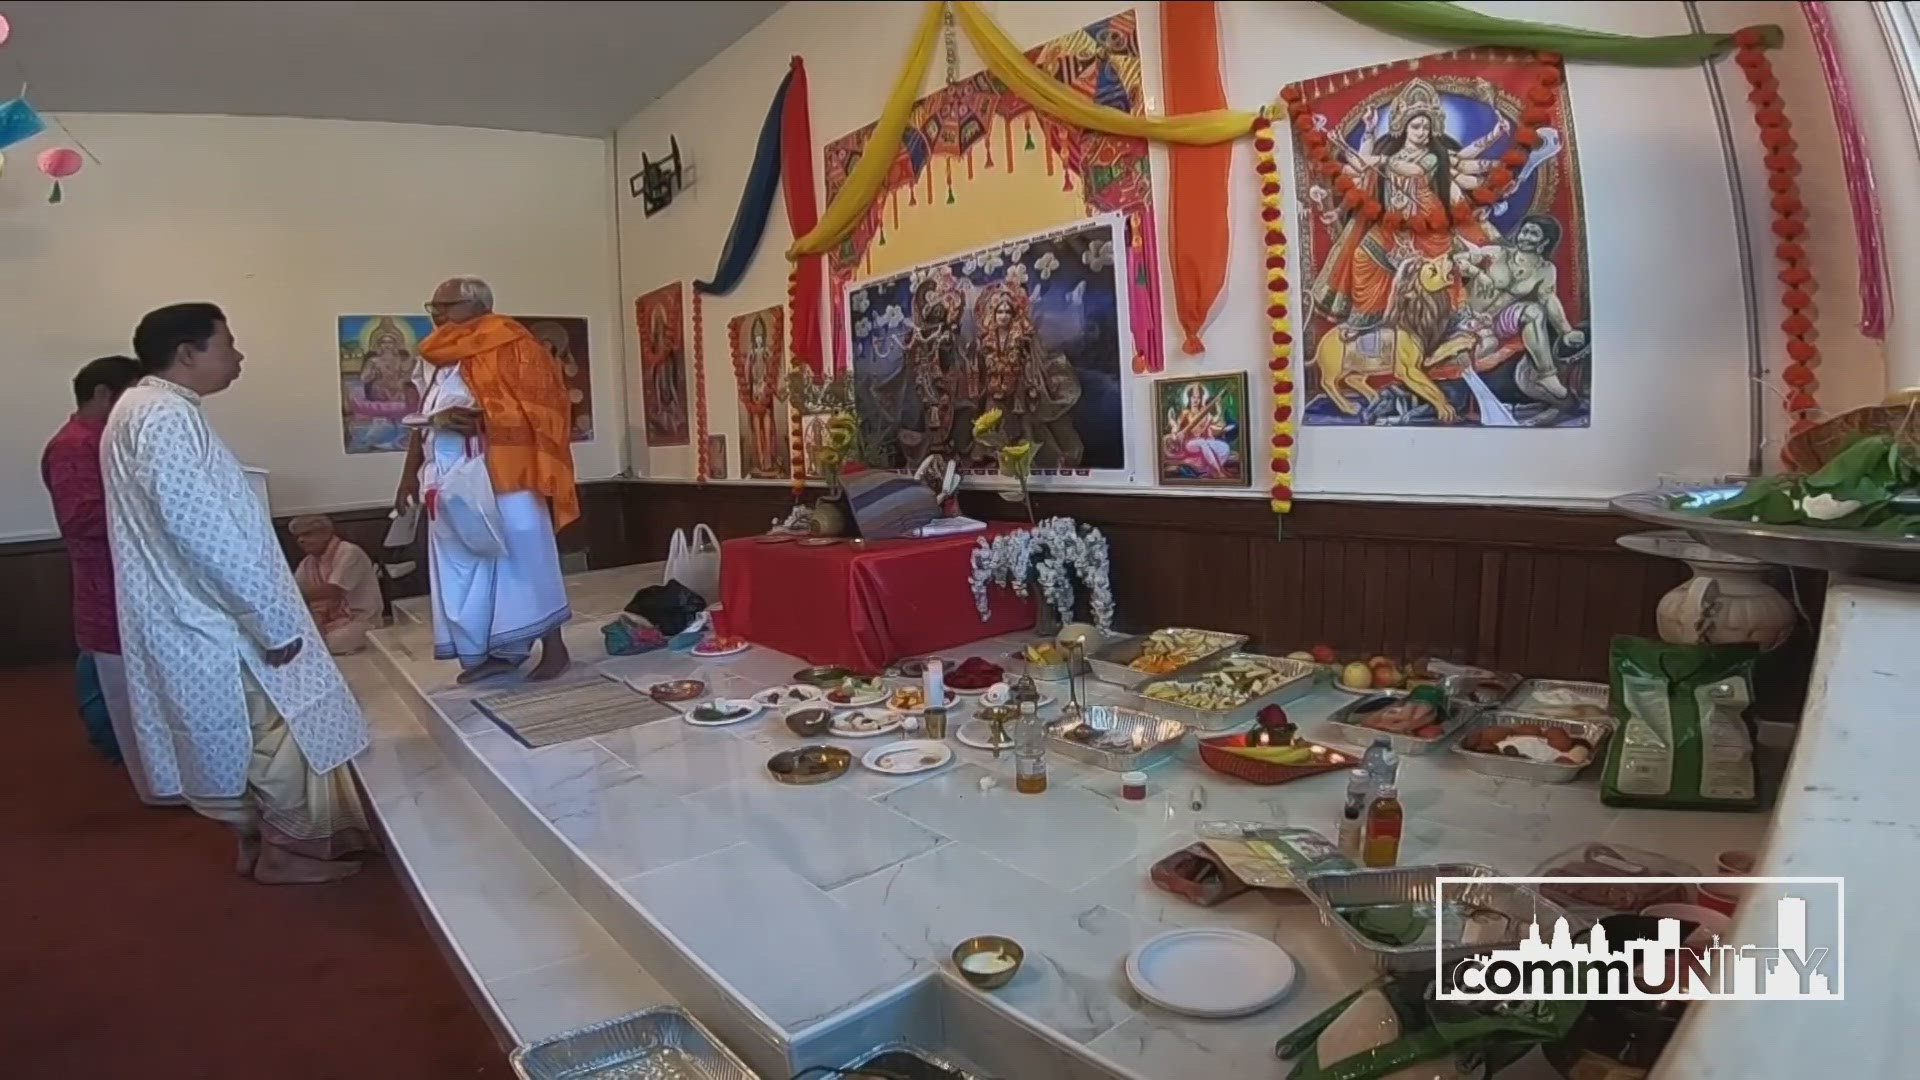 West Seneca is home to a new Buffalo Hindu Parishad Temple and Cultural Center.